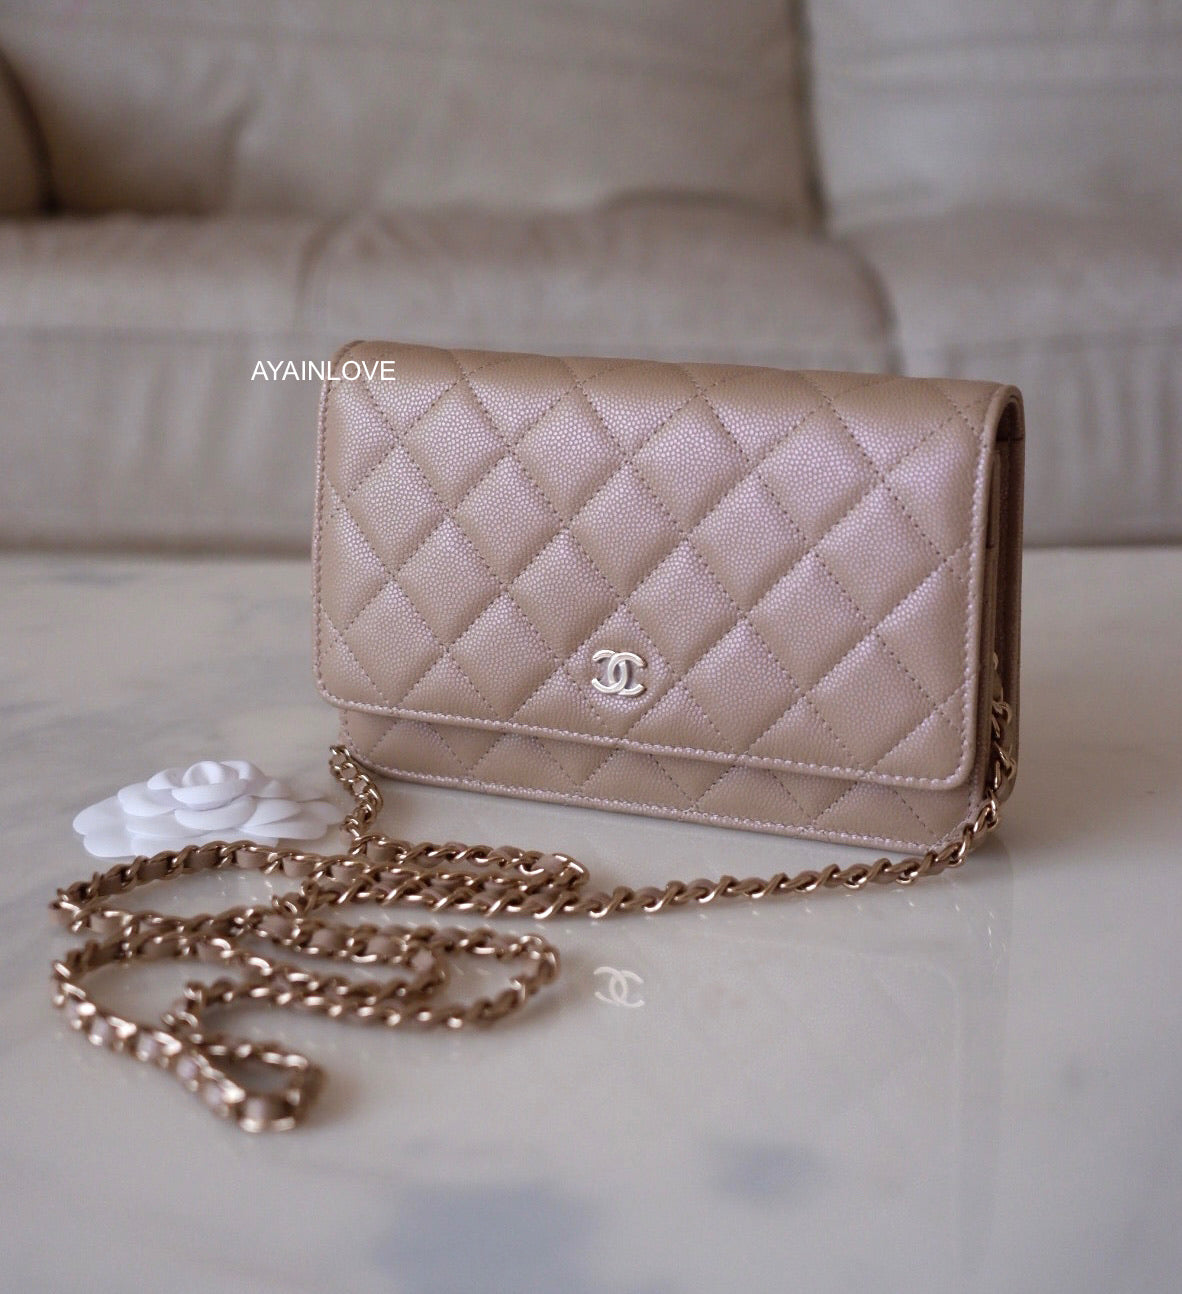 Chanel Classic Wallet on Chain Beige Quilted Caviar with gold hardware